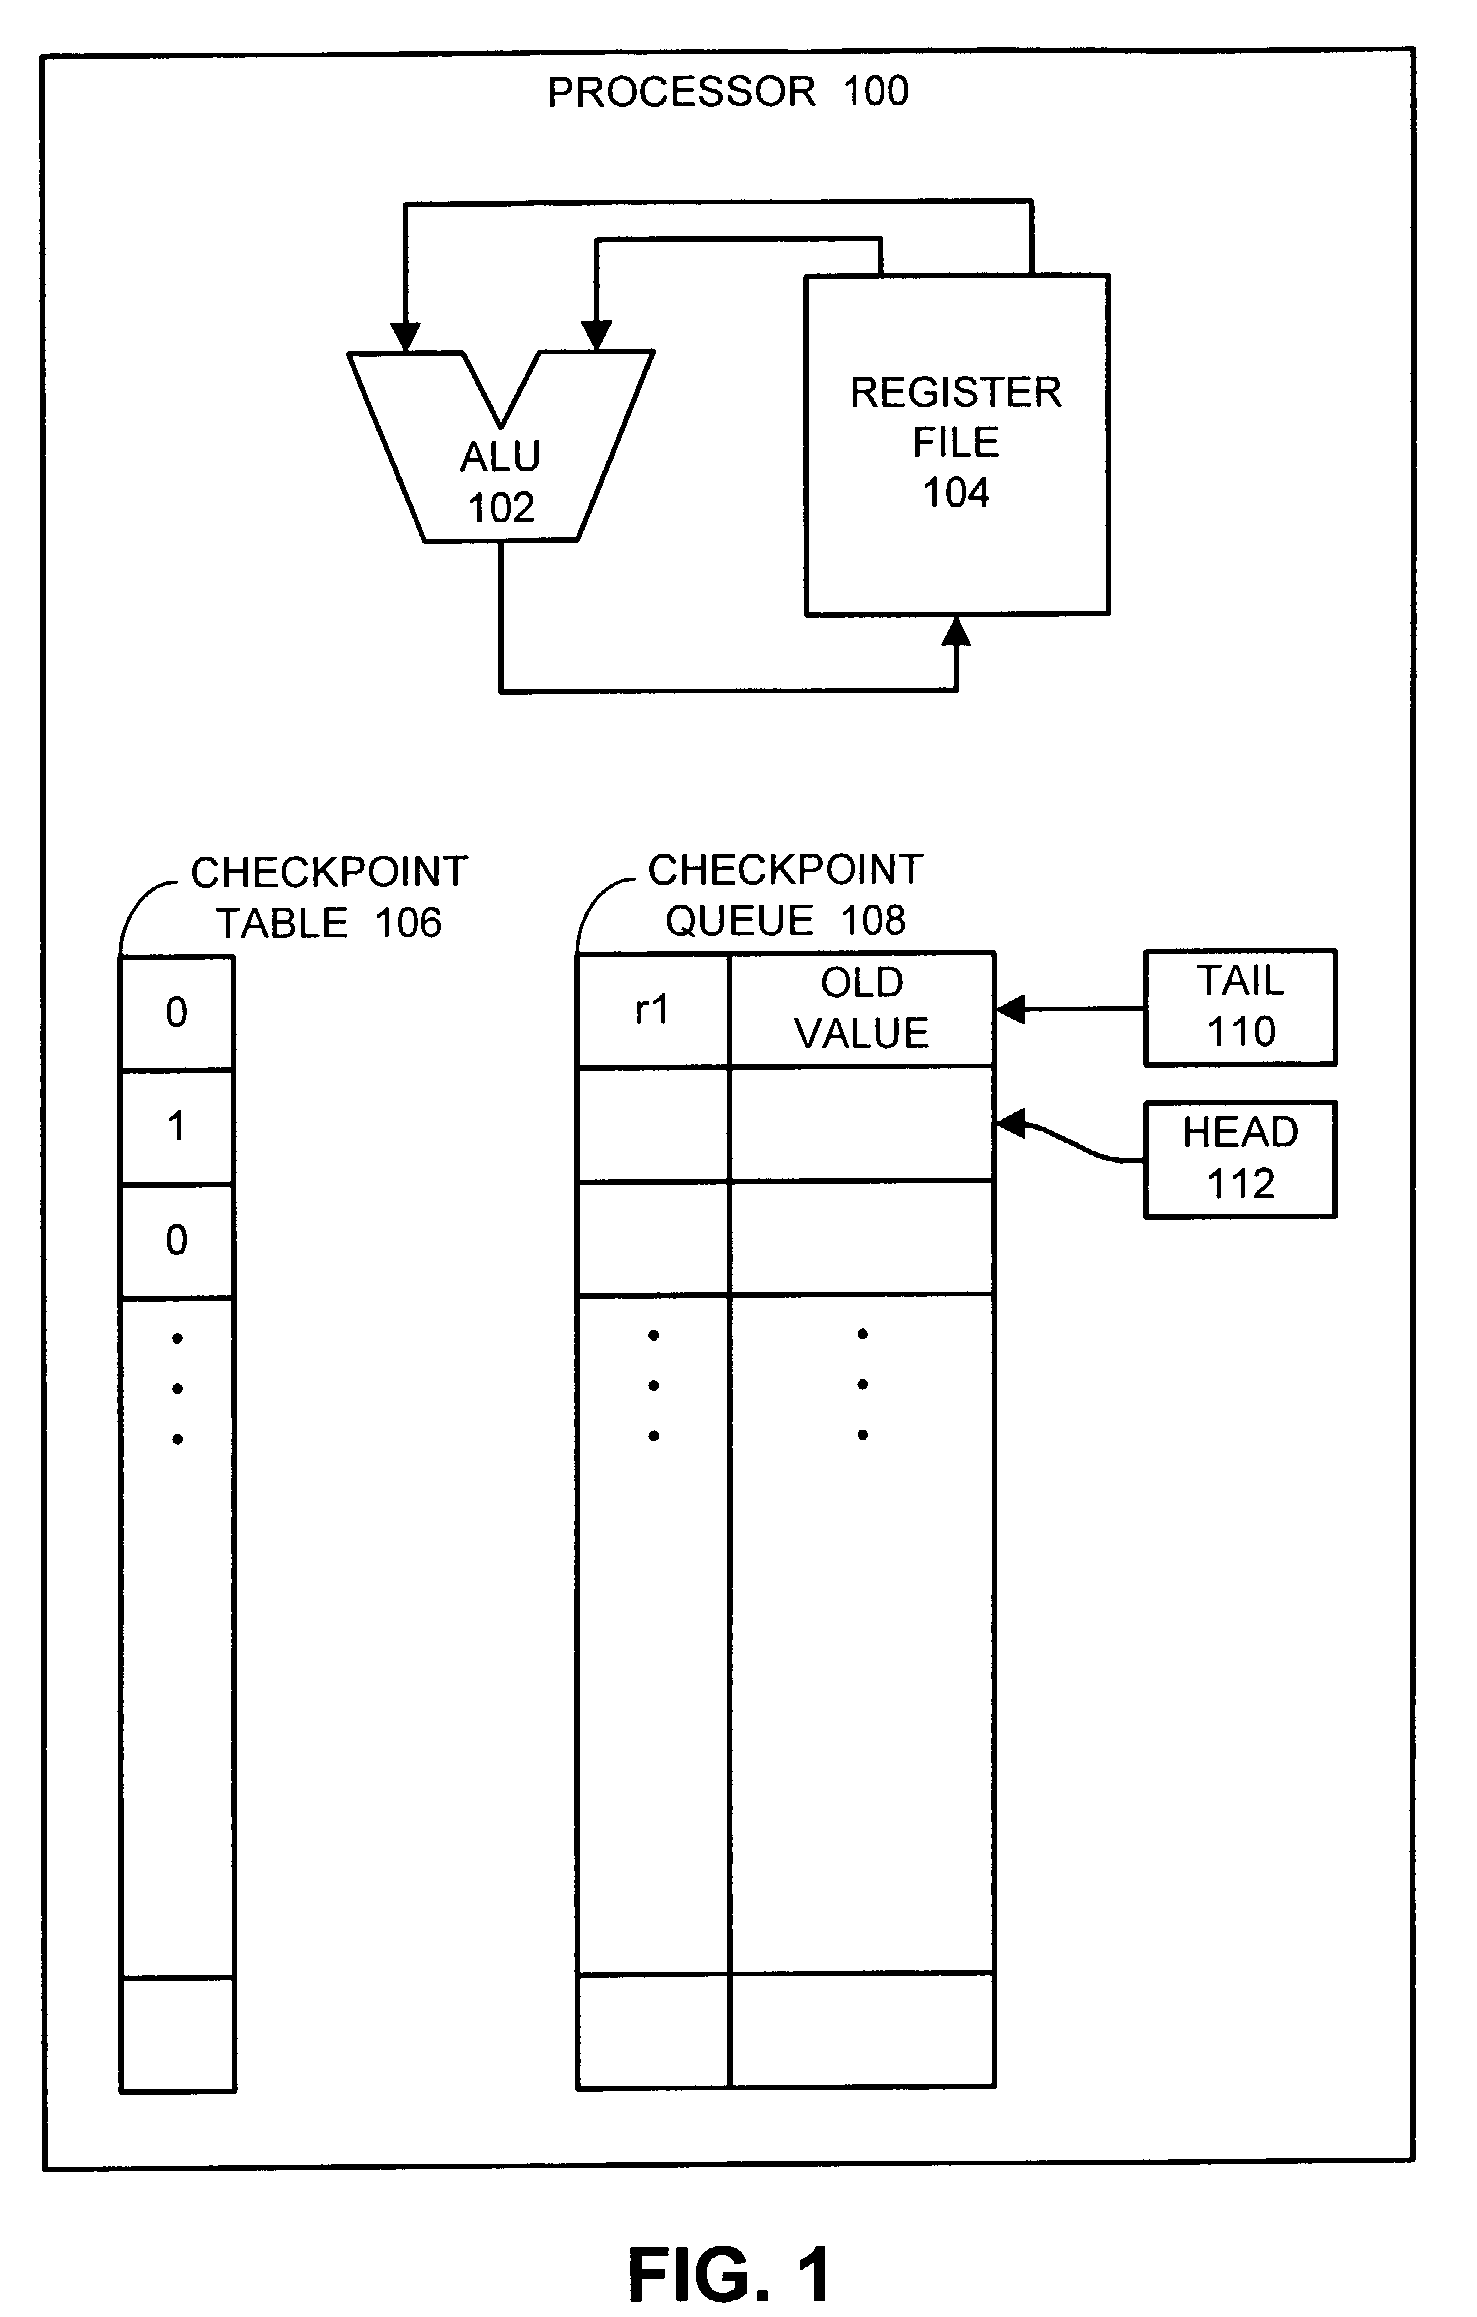 Method and apparatus for performing register file checkpointing to support speculative execution within a processor